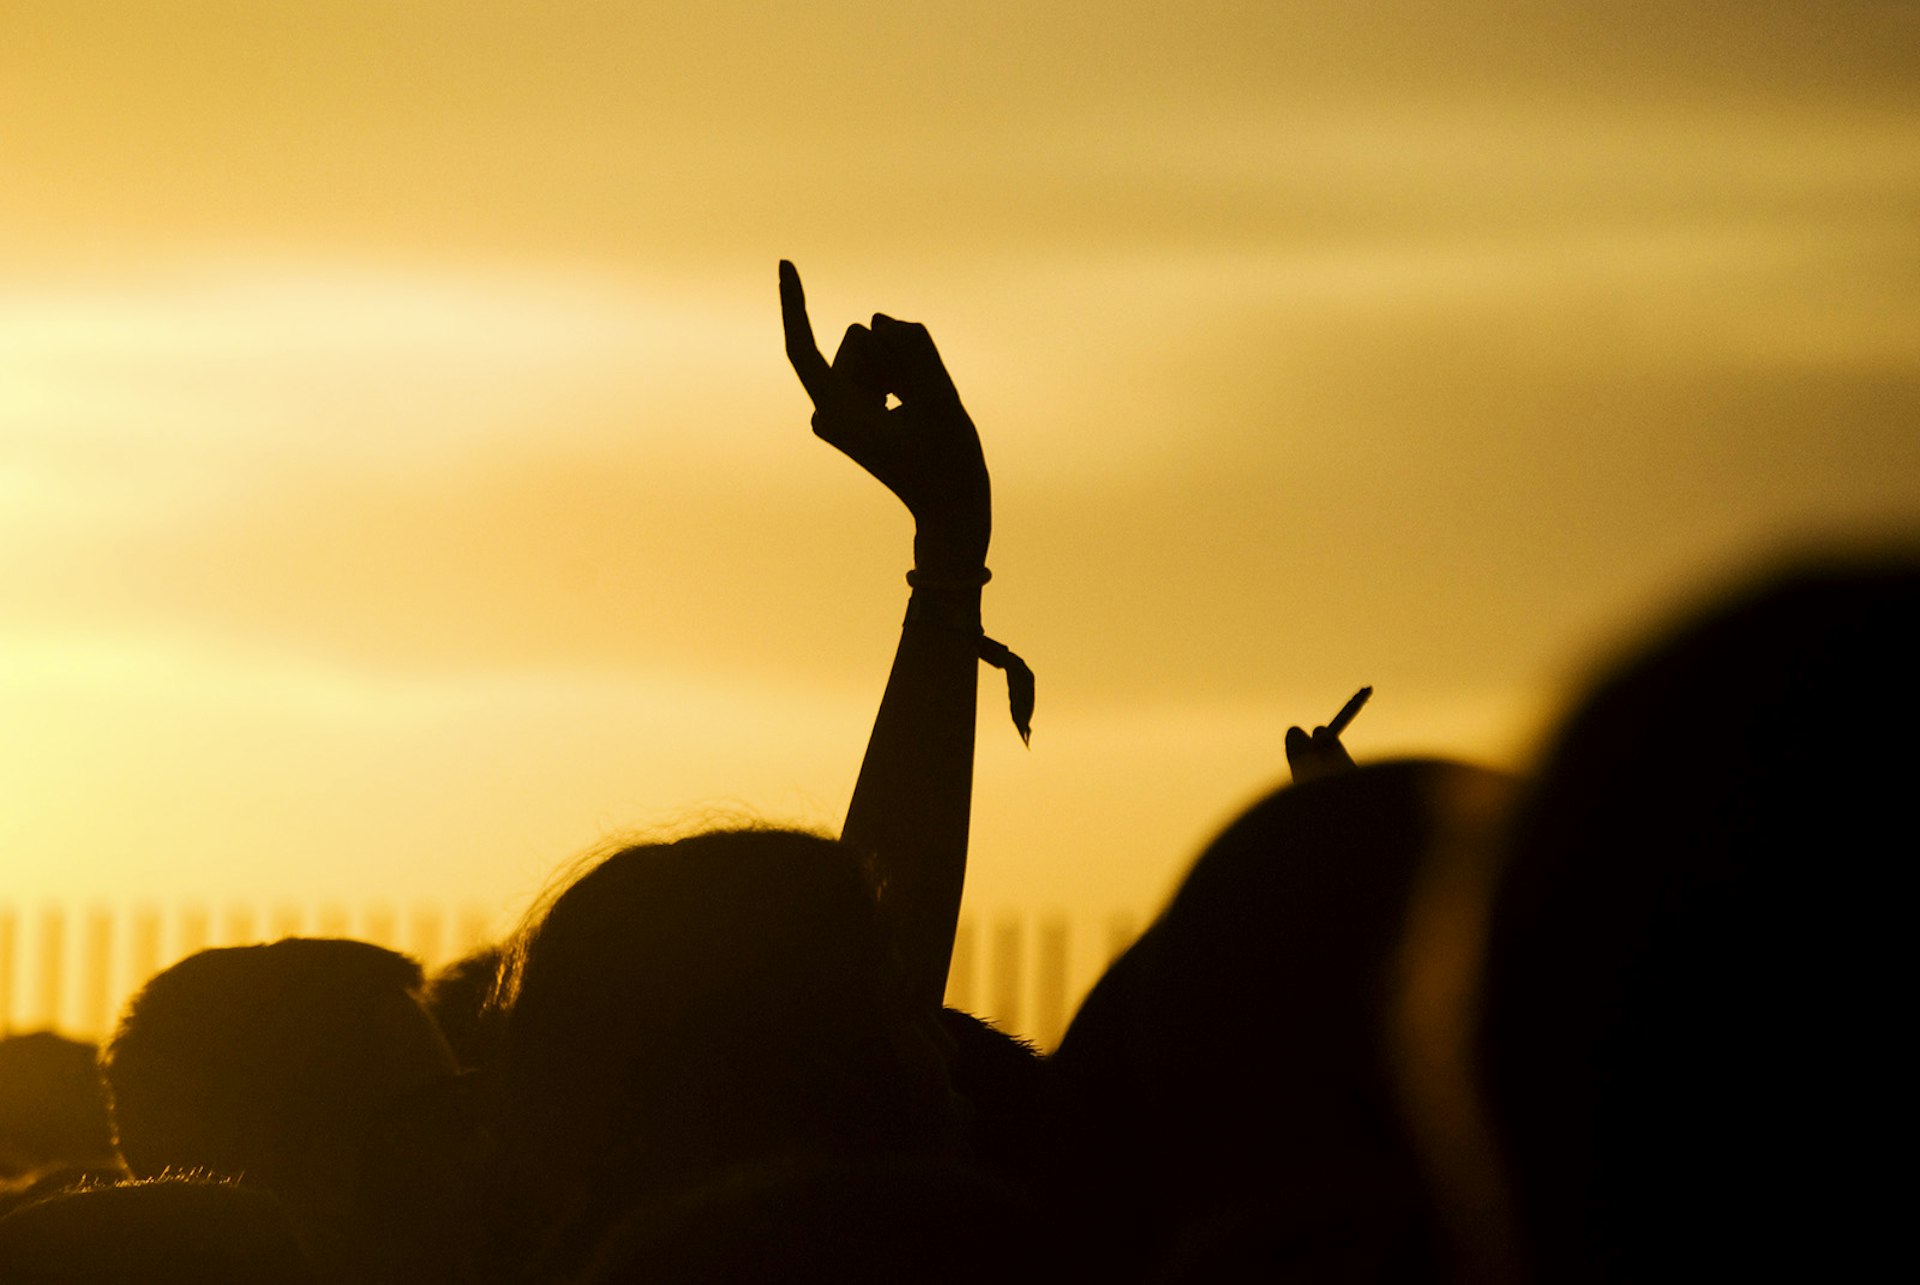 Features - Arms raised people in Music festival